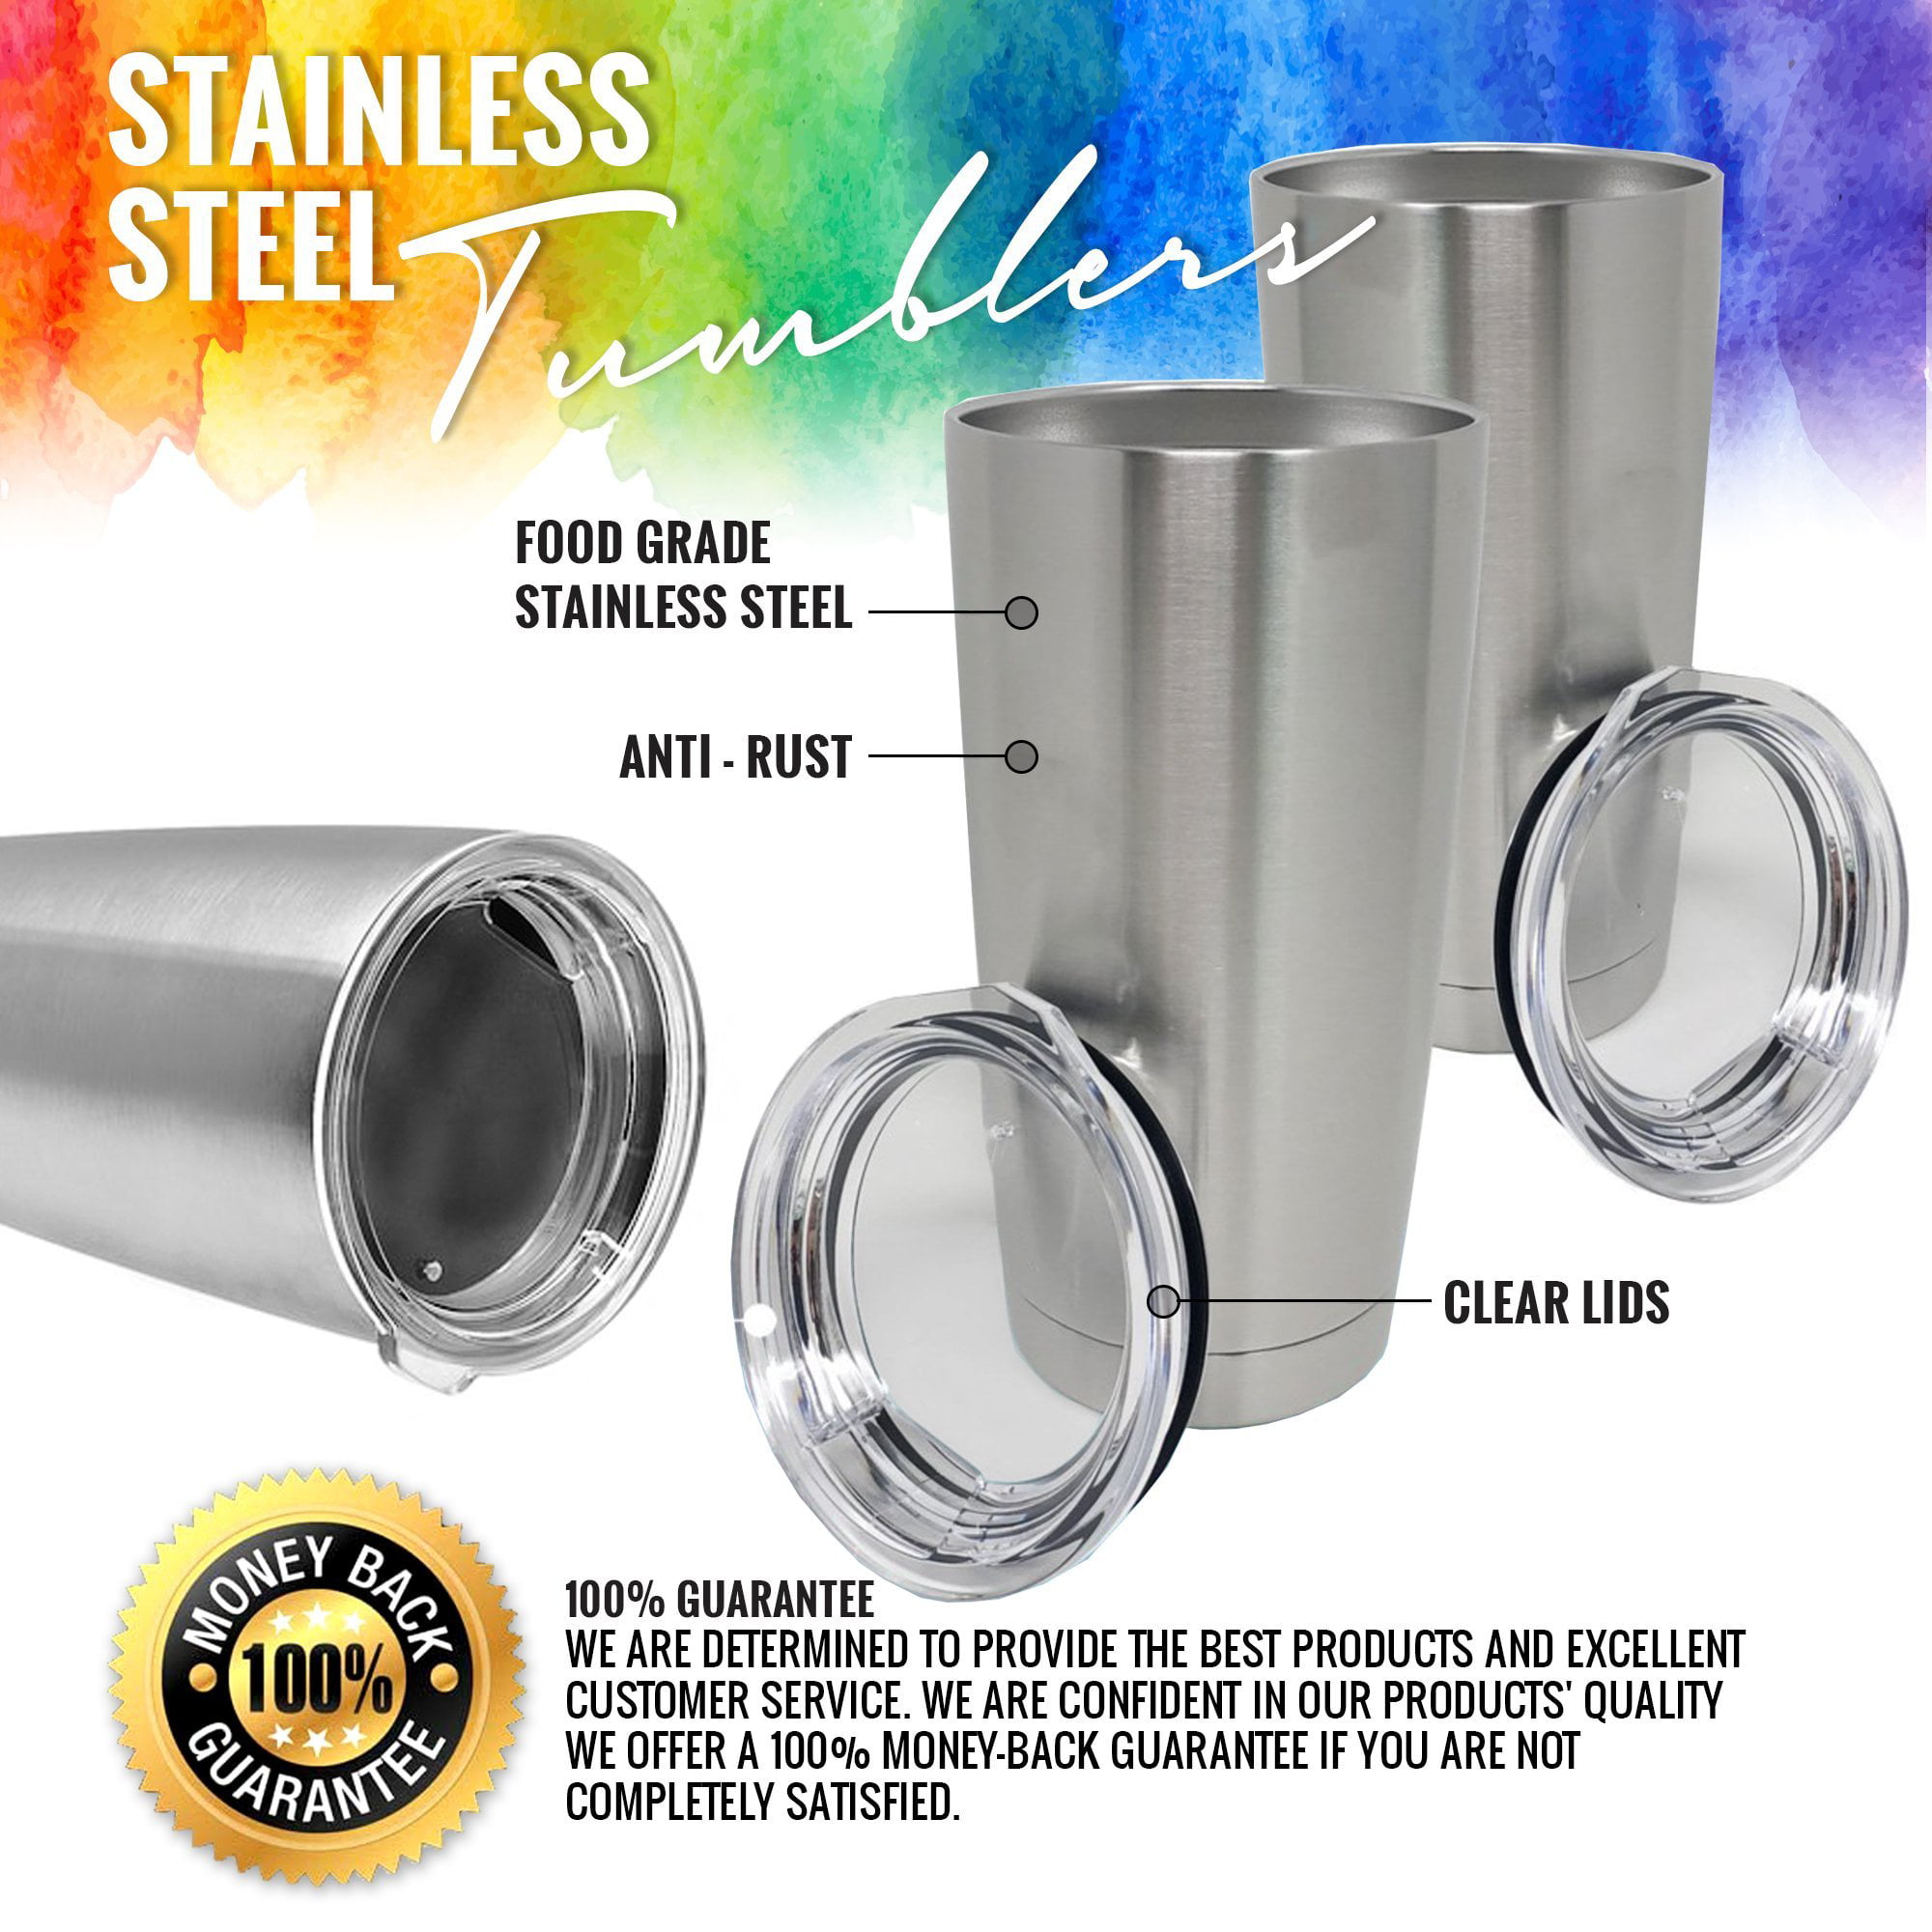 20oz Stainless Steel Tumbler - 4 Pack - Expressions Vinyl